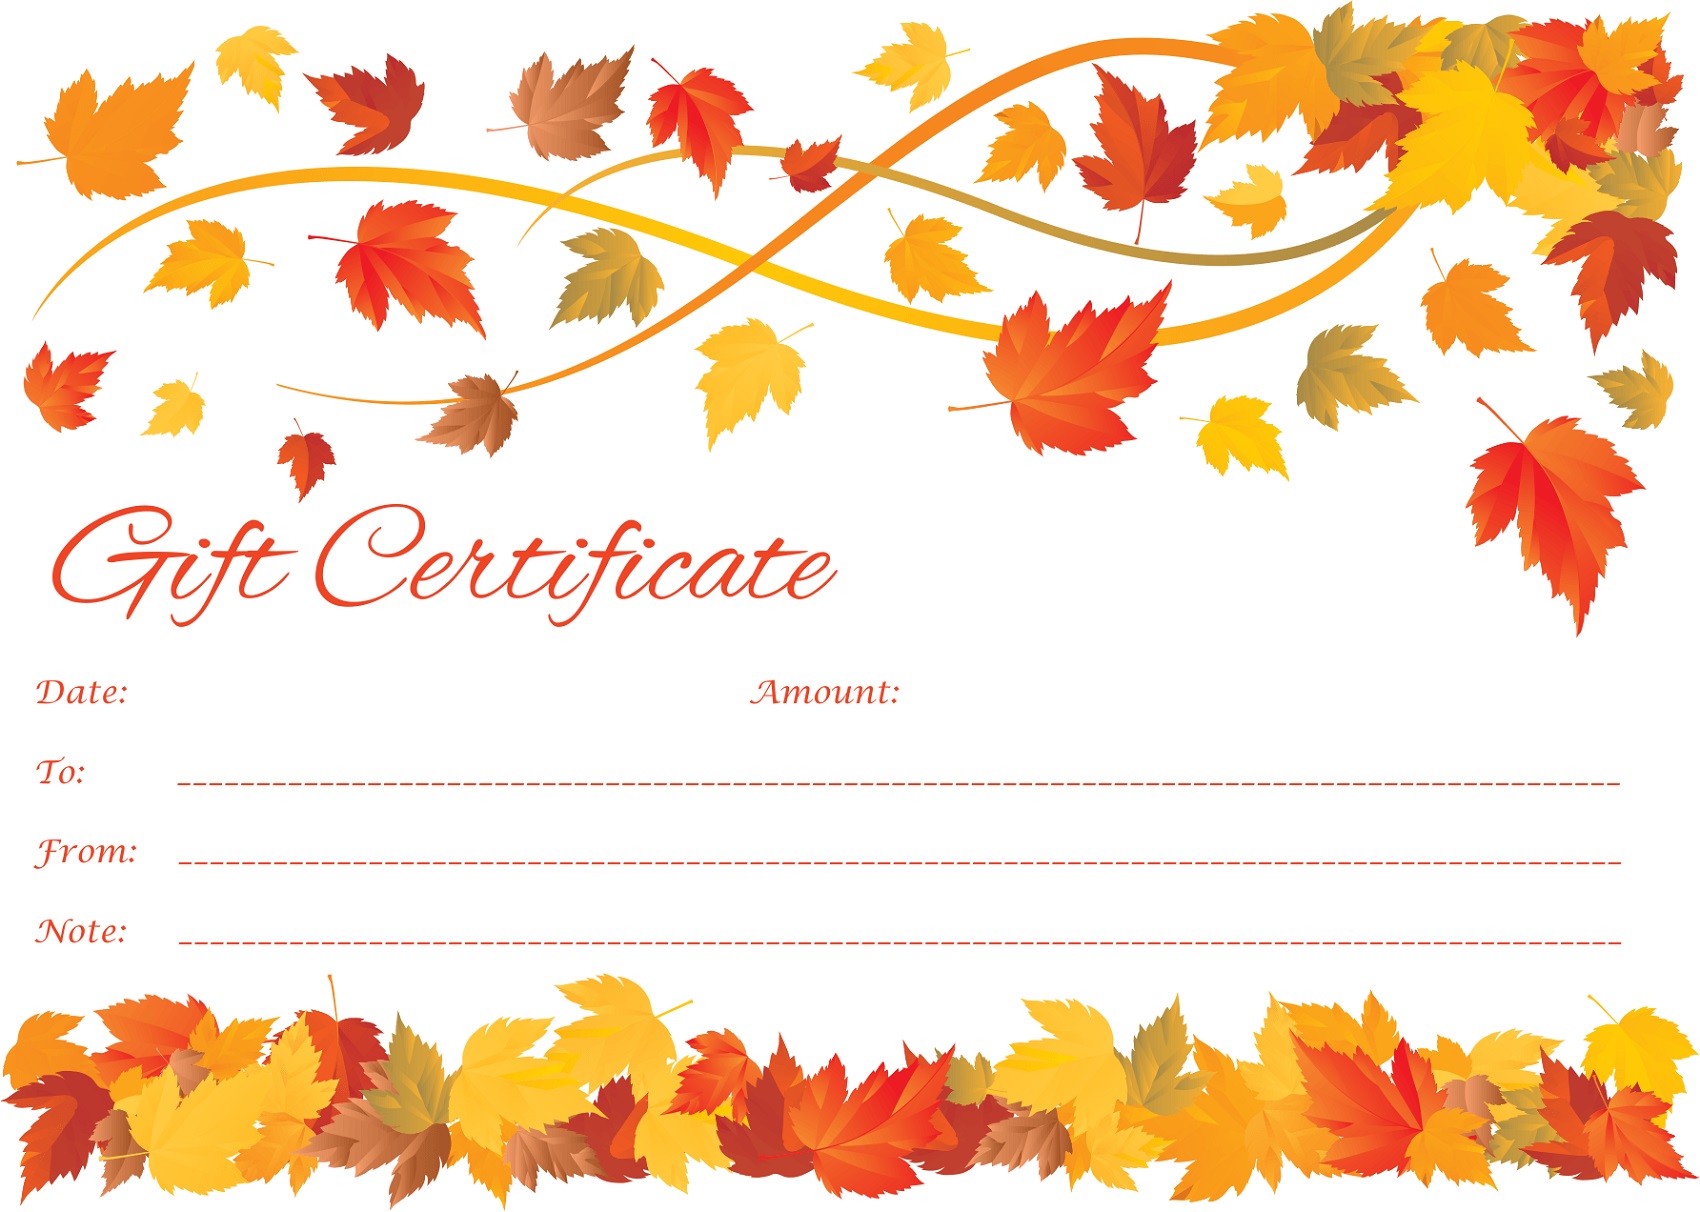 Fall Gift Certificate Template